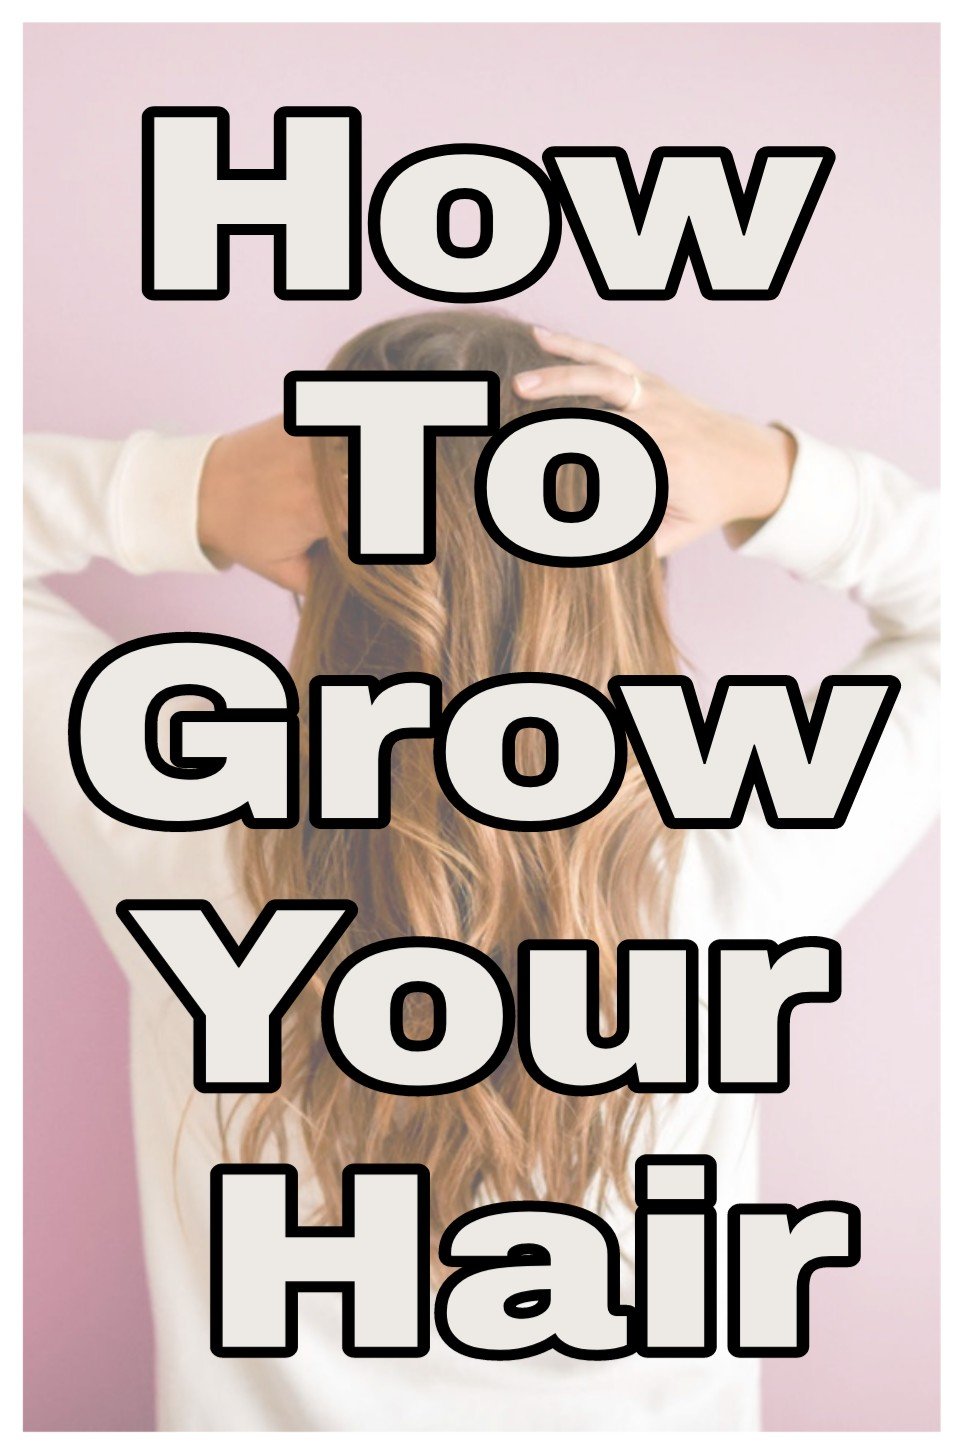 How to grow your hair title with faded background image of a woman with long healthy hair